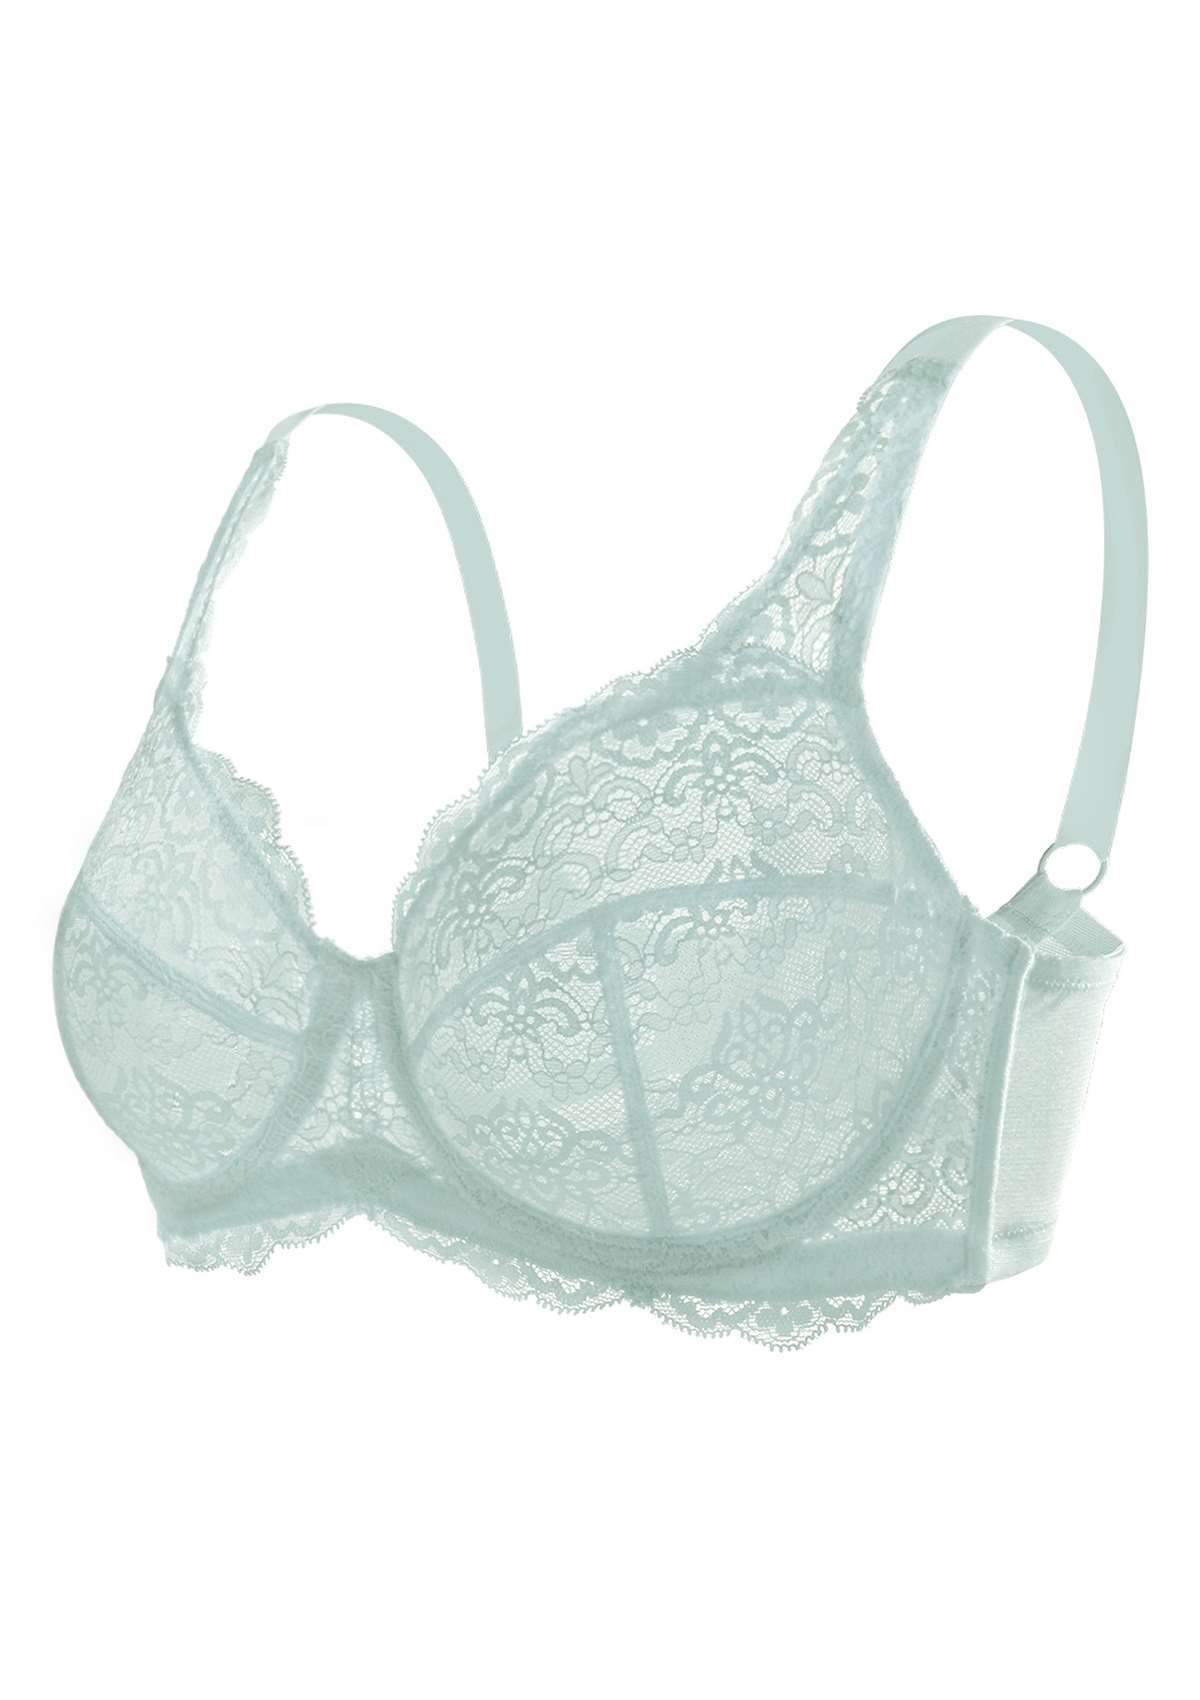 HSIA All-Over Floral Lace: Best Bra For Elderly With Sagging Breasts - Crystal Blue / 36 / C